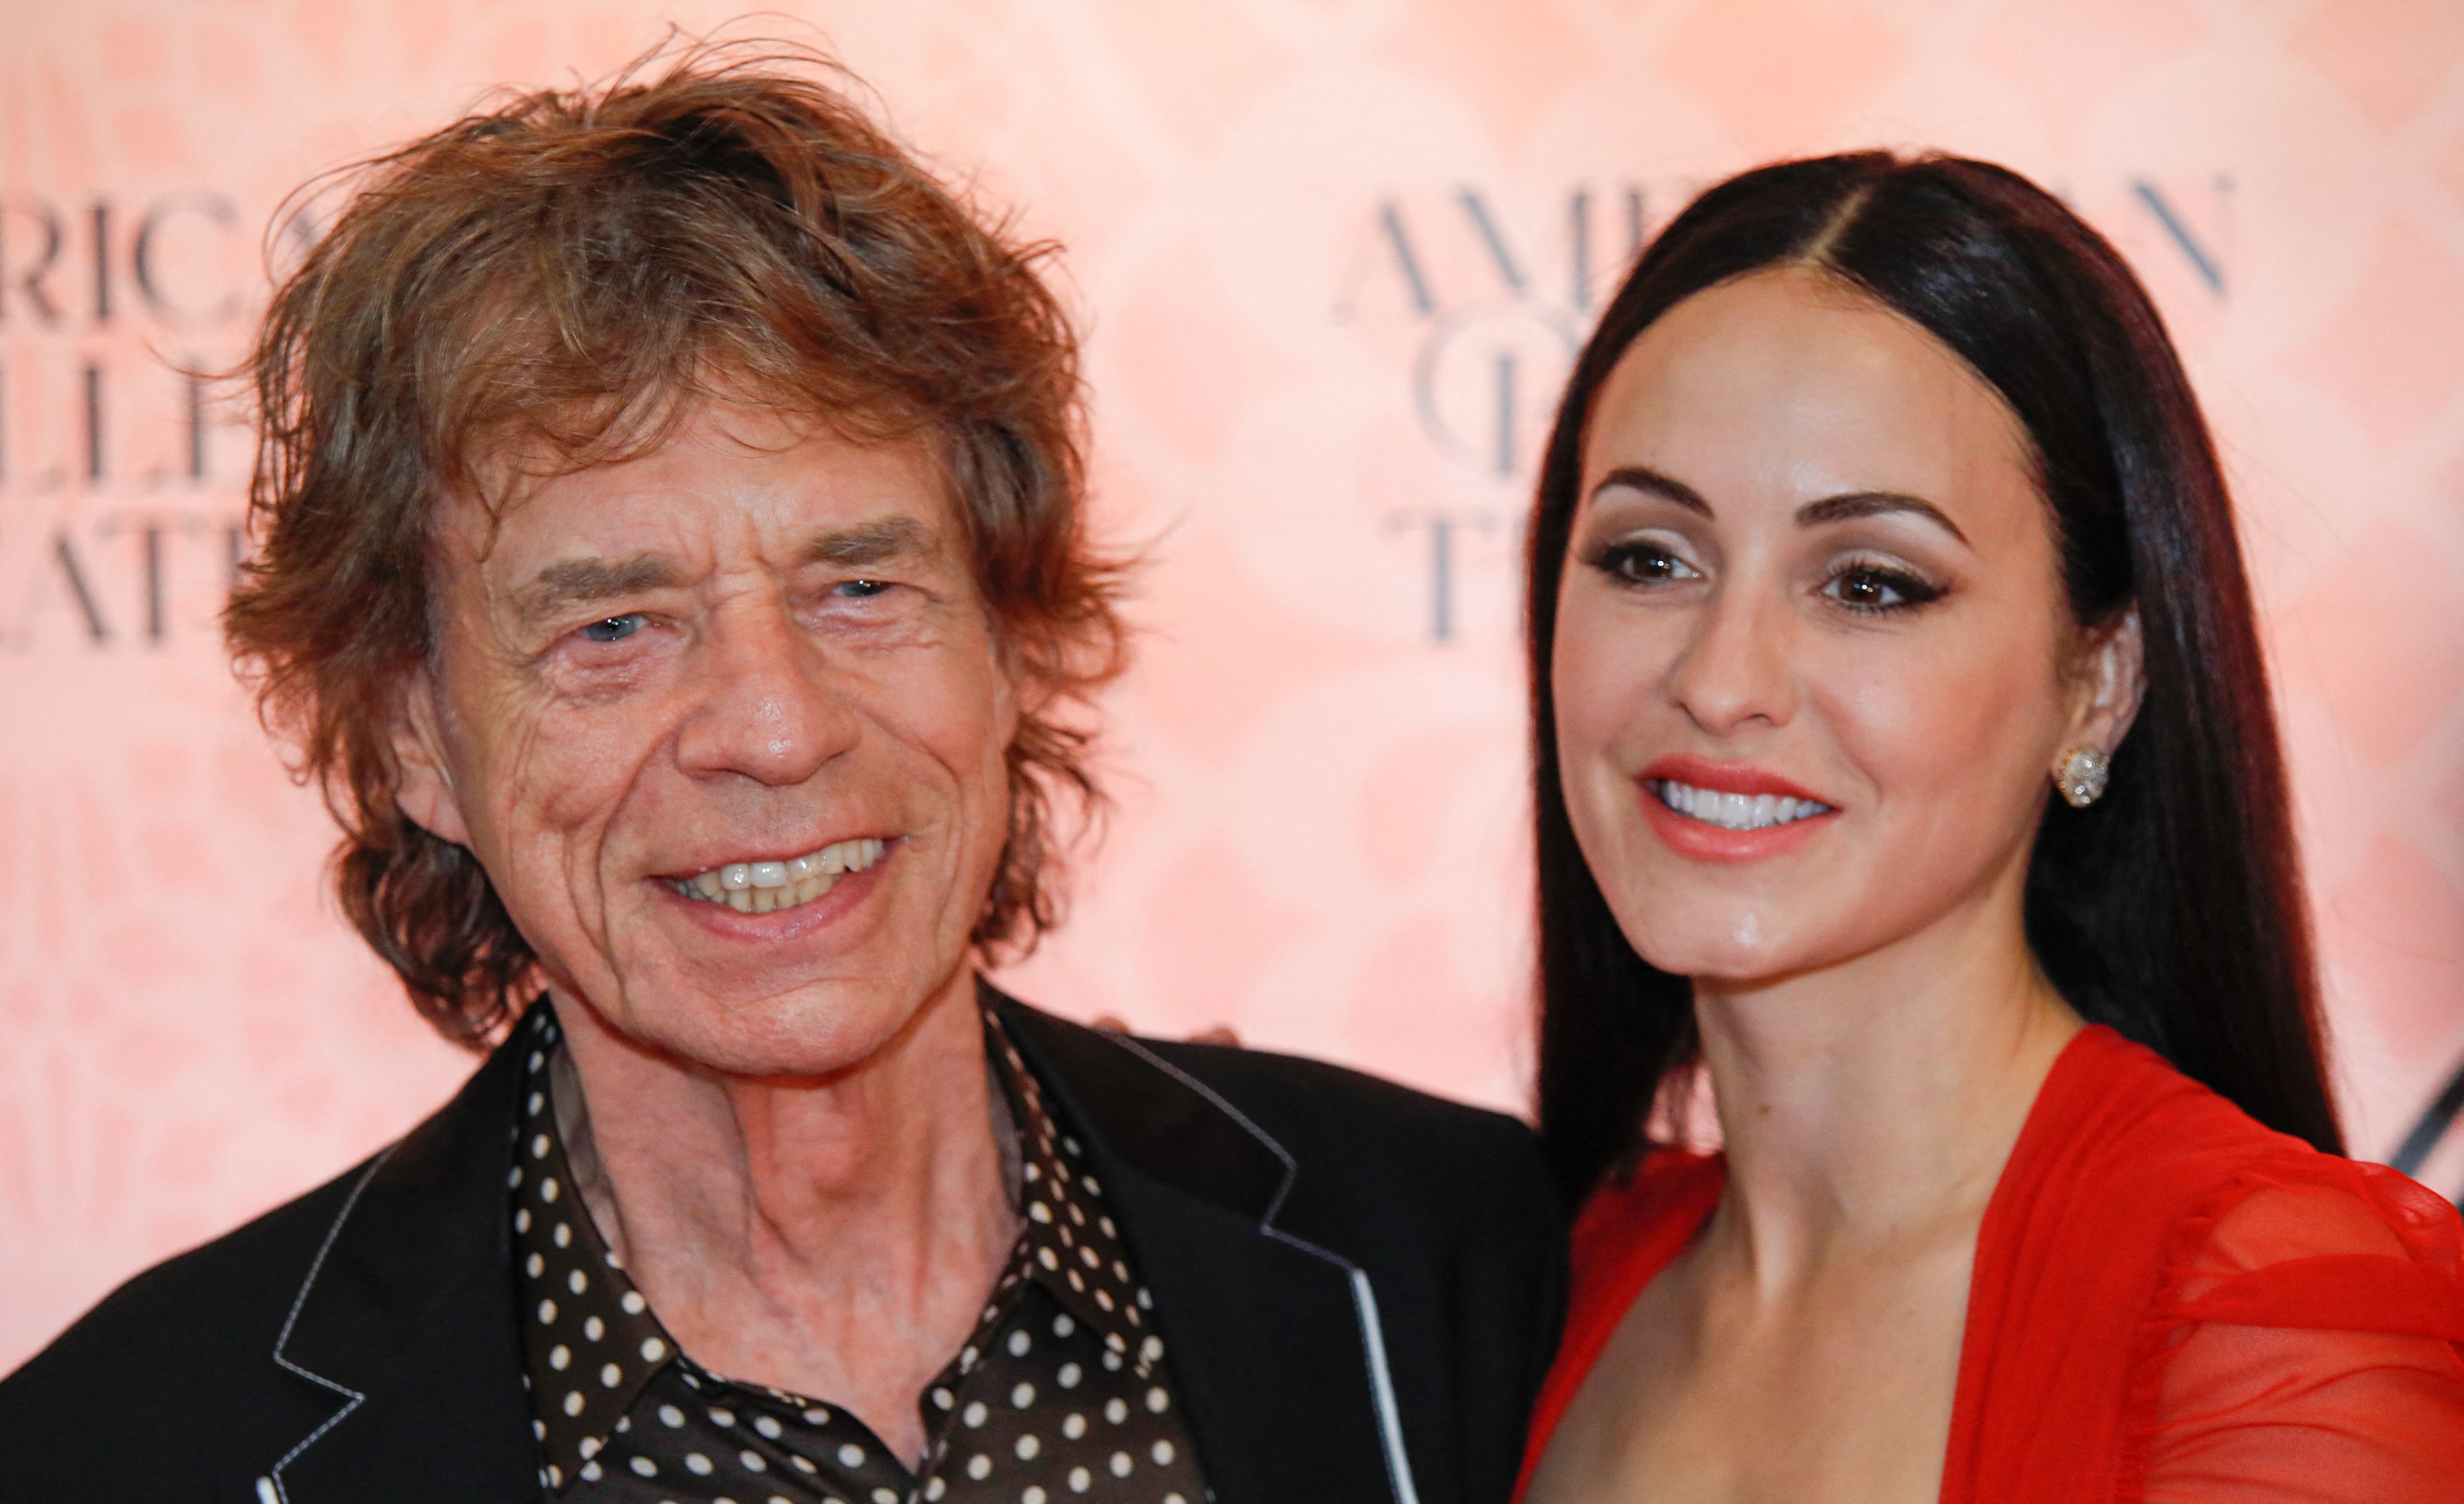 Mick Jagger and Melanie Hamrick at the 2023 American Ballet Theater's the opening night of "Like Water For Chocolate" on June 22, 2023 in New York. | Source: Getty Images